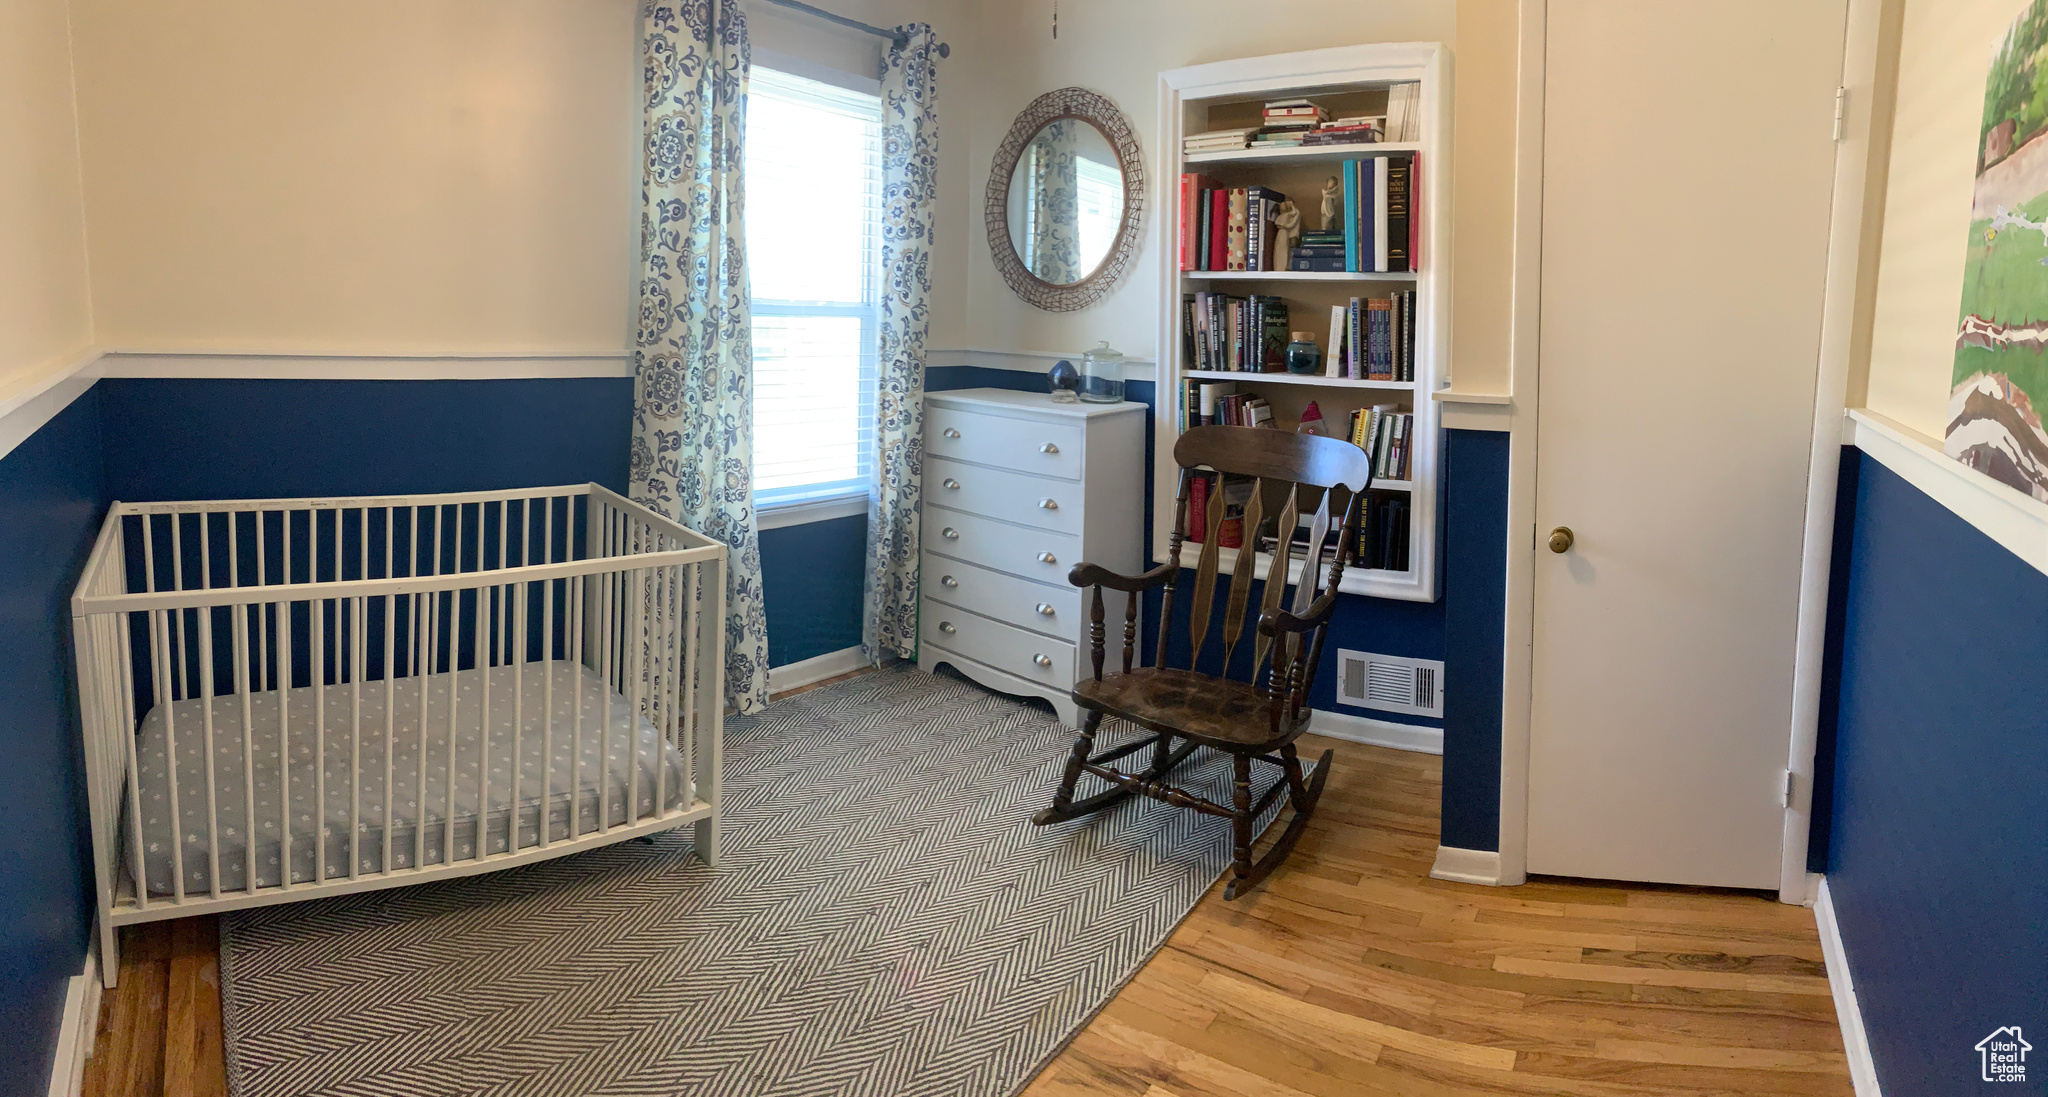 Bedroom featuring wood-type flooring and a nursery area